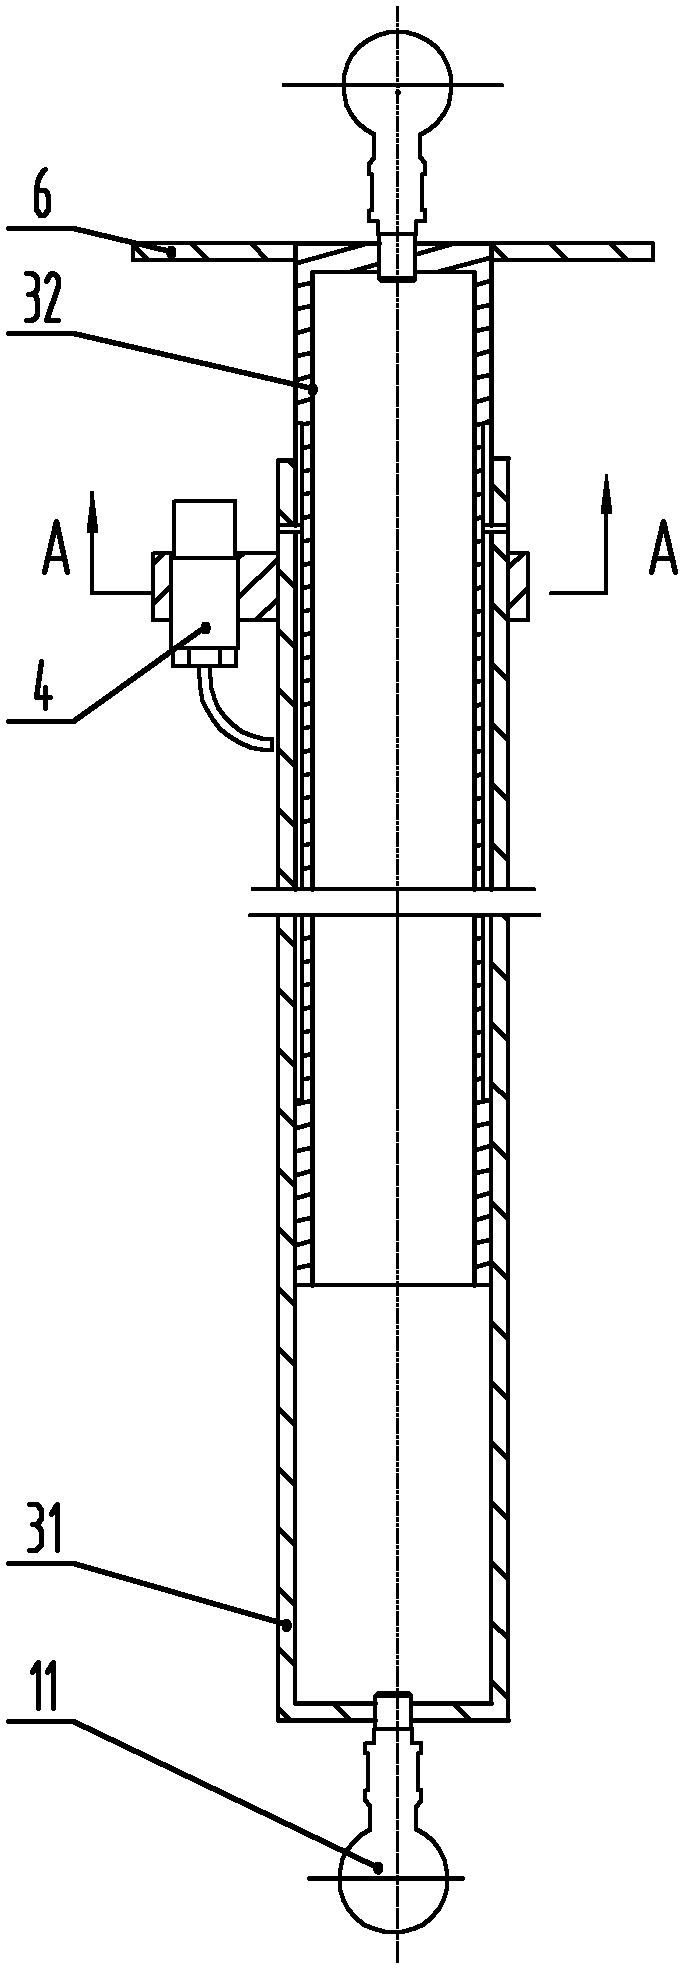 Telescopic parallel pull rod type device used for measuring spatial six-degree-of-freedom motion